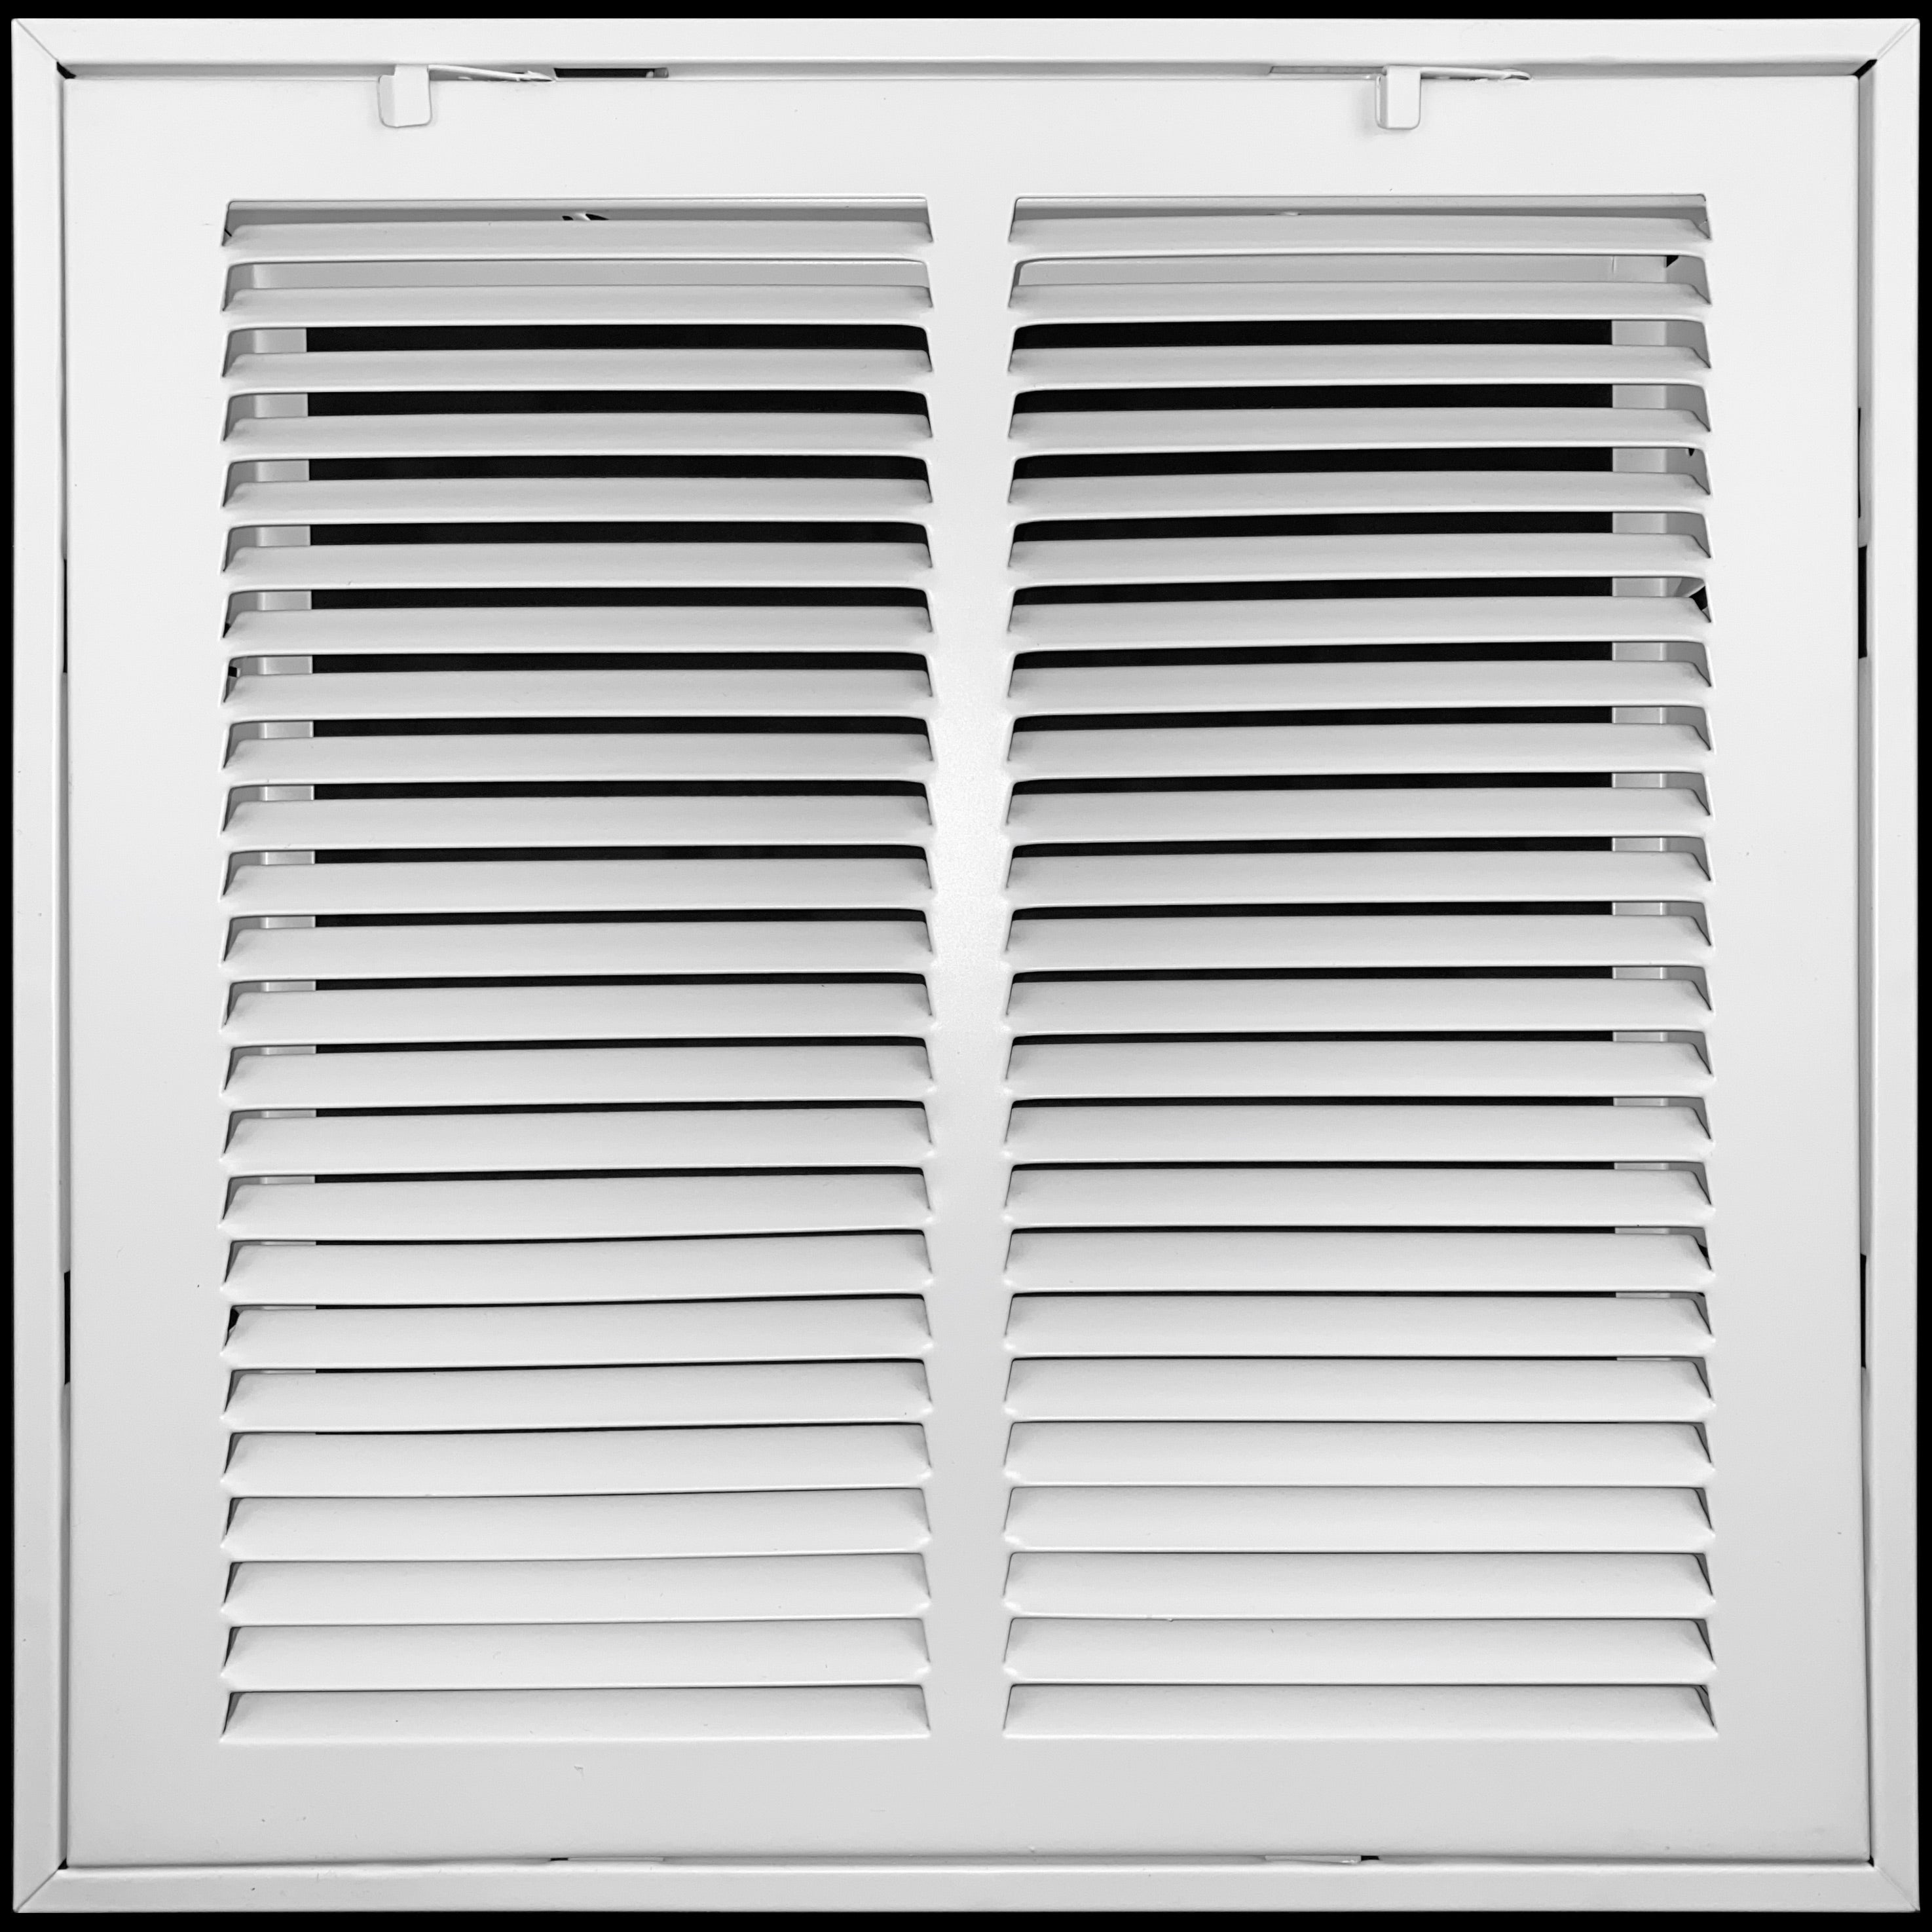 airgrilles 14" x 14" duct opening  -  hd steel return air filter grille for sidewall and ceiling 7hnd-rfg1-wh-14x14 038775638142 - 1